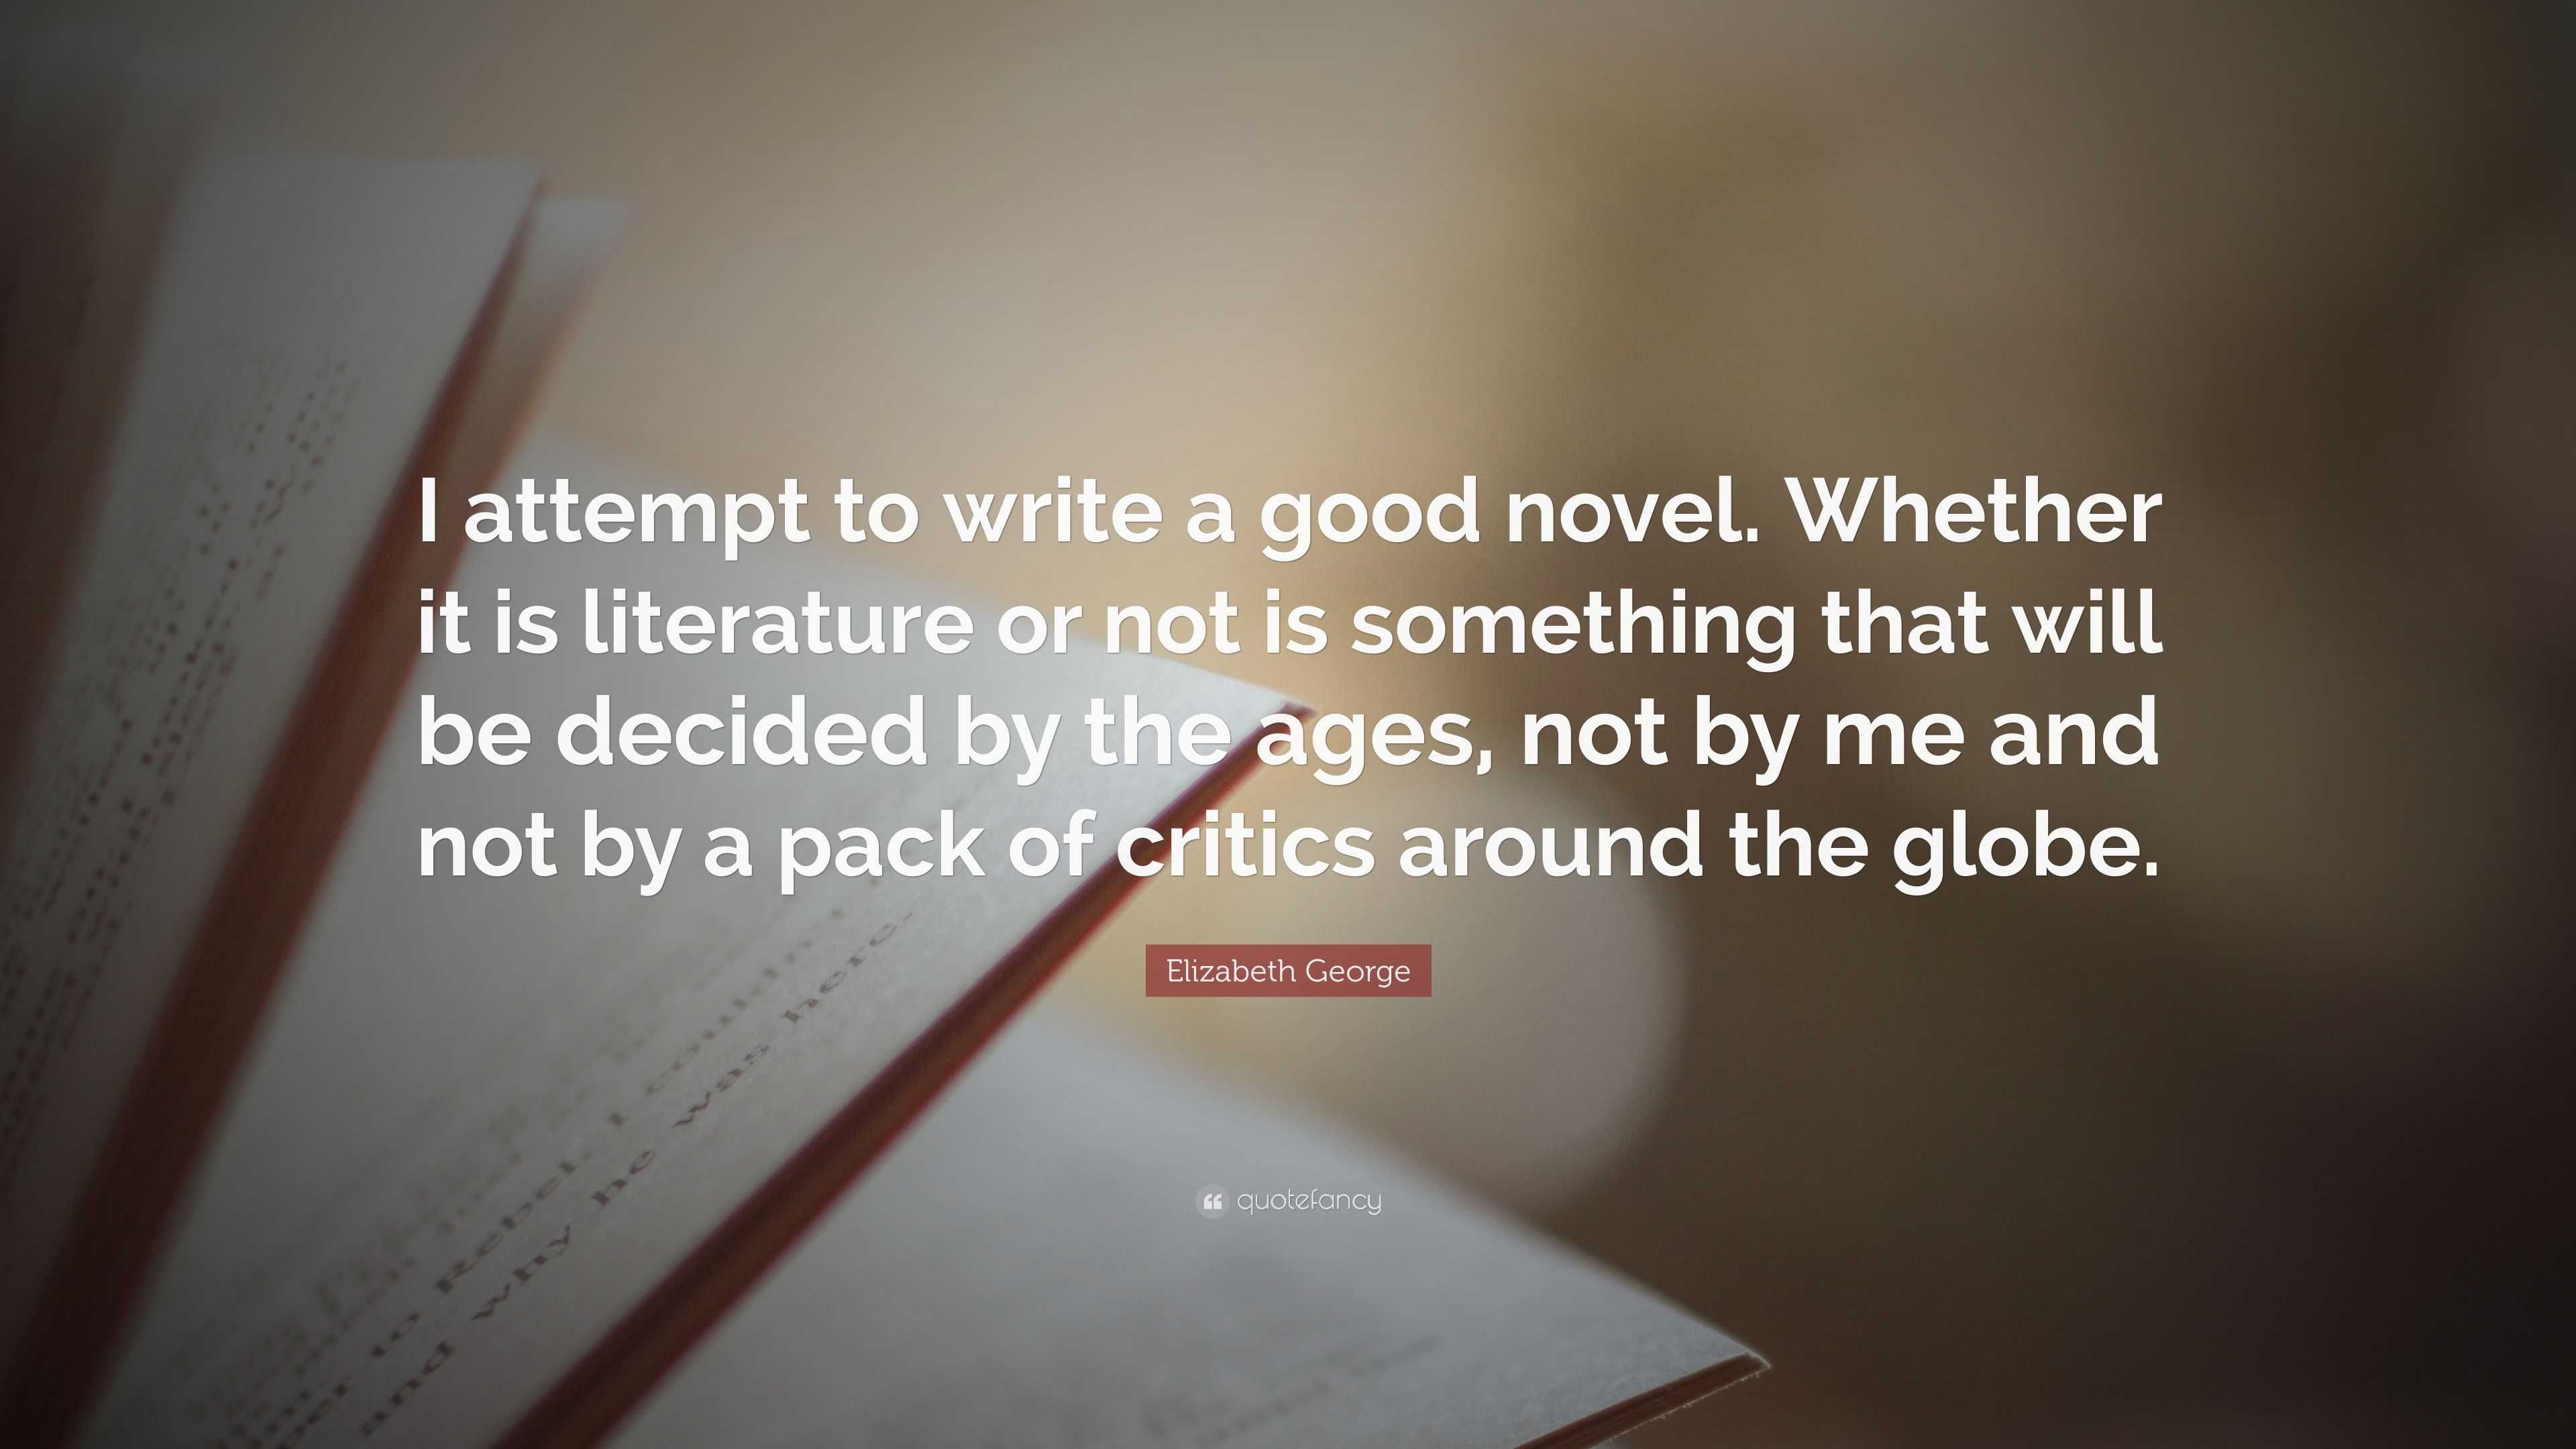 Elizabeth George Quote: “I attempt to write a good novel. Whether